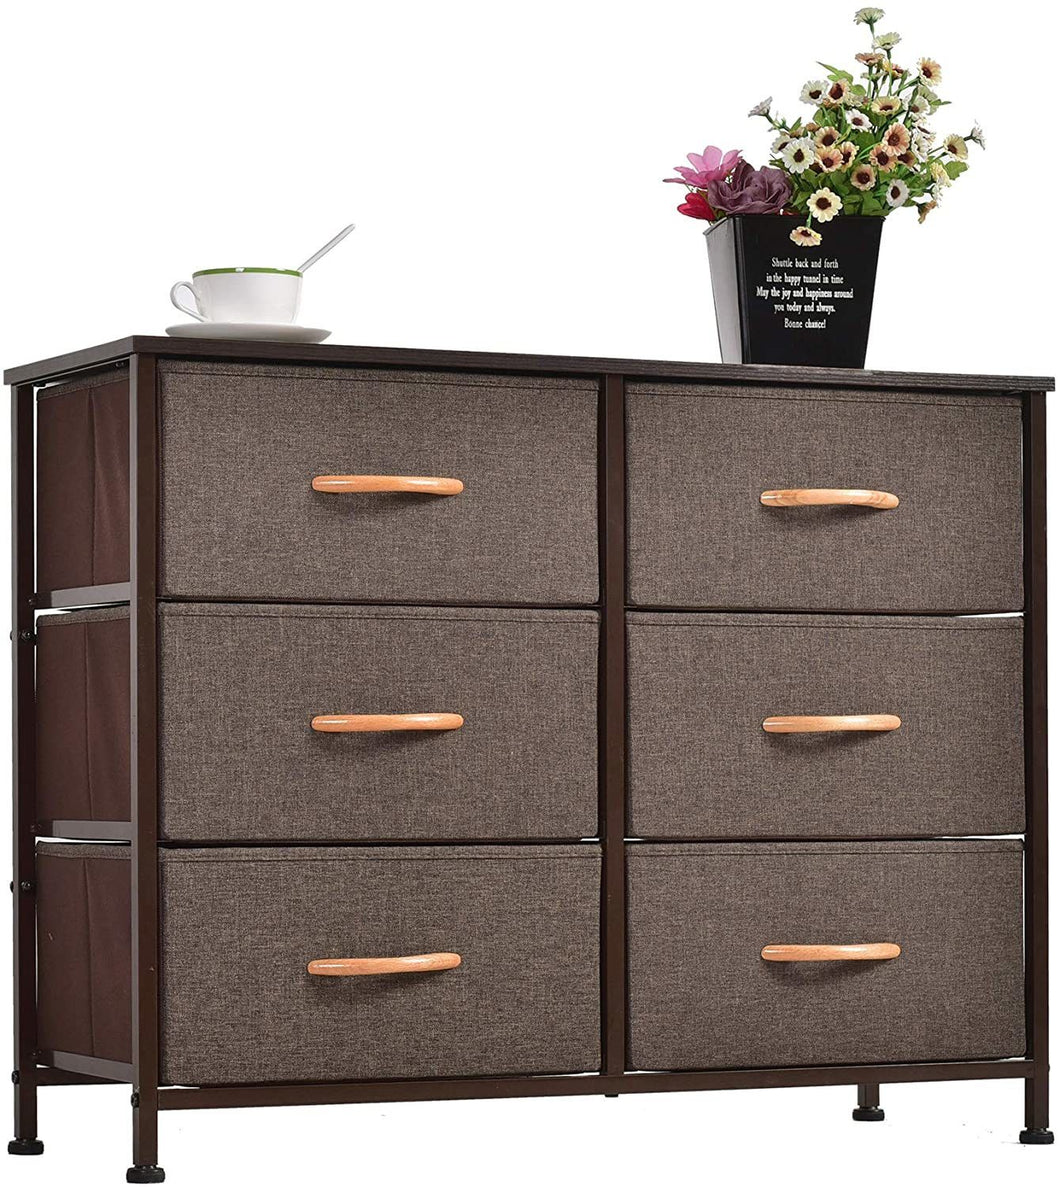 Dresser Closet with 6 Drawers;  Storage Tower Unit for Bedroom;  Hallway;  Closet;  Office Organization;  Wood Top;  Easy Pull Fabric Bins - Brown